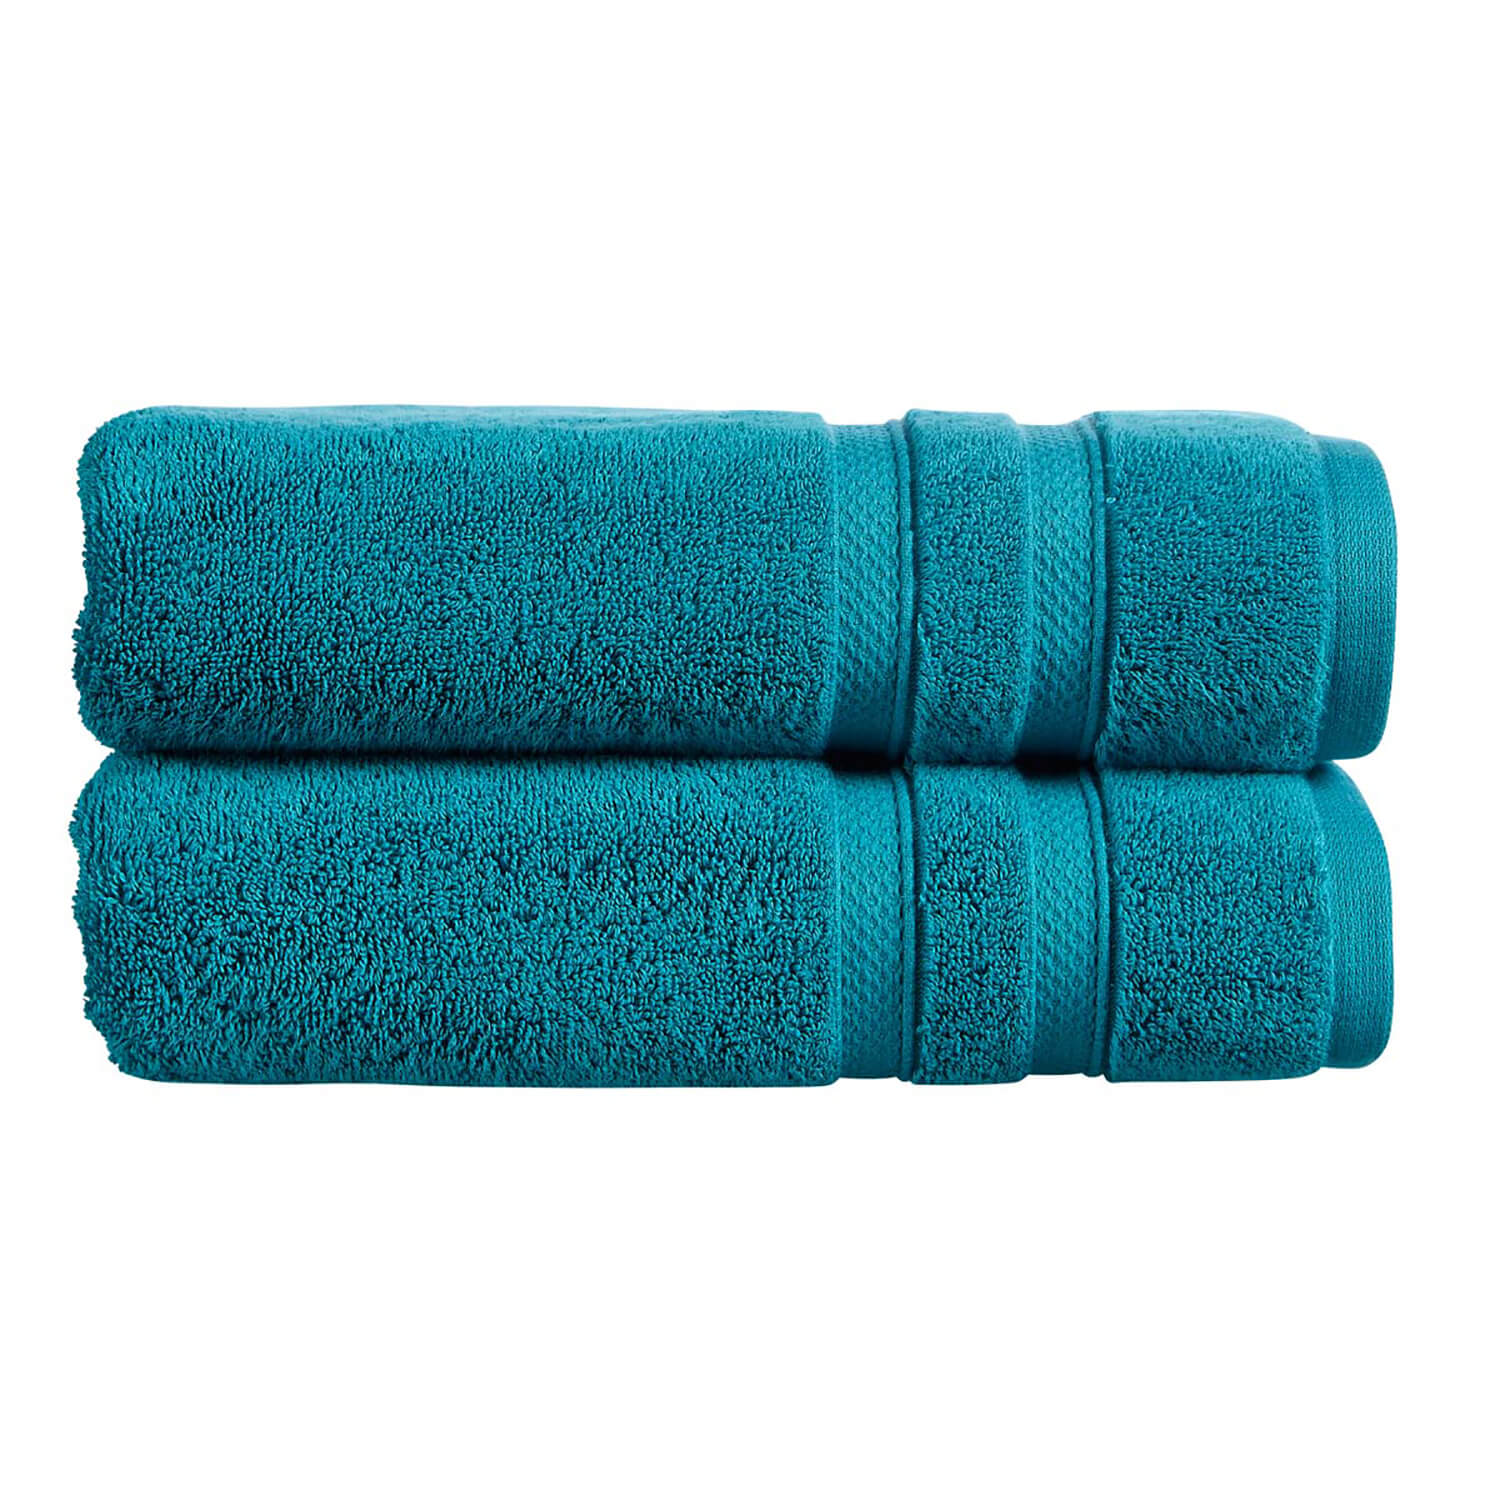 Christy Chroma Hand Towel - Lagoon 1 Shaws Department Stores